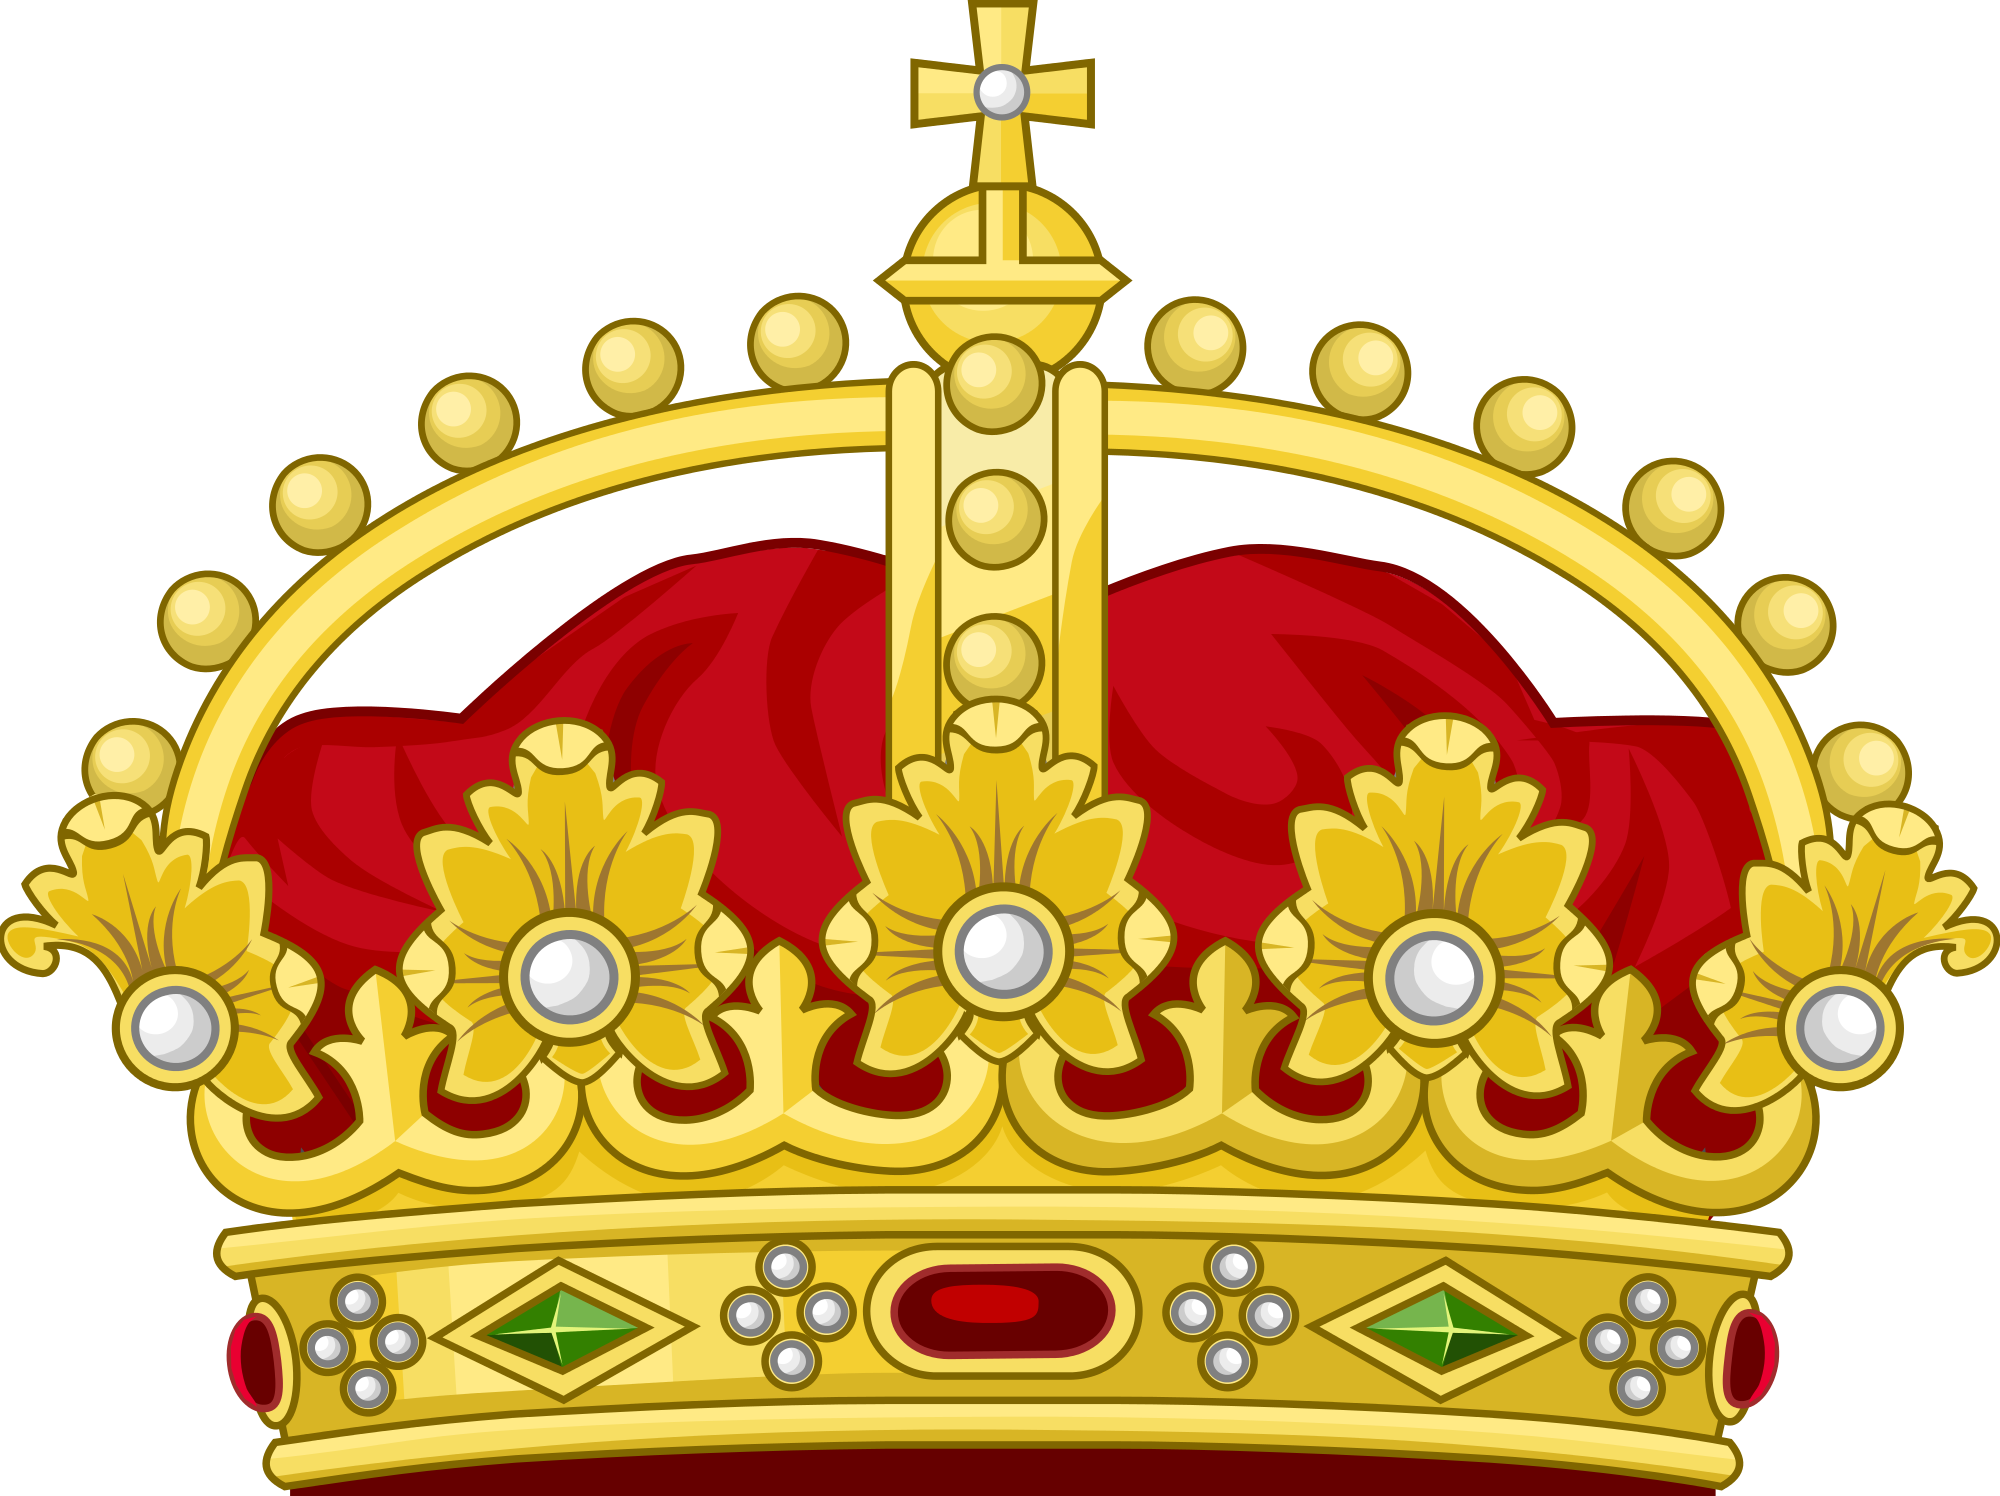 constitutional monarchy clipart
